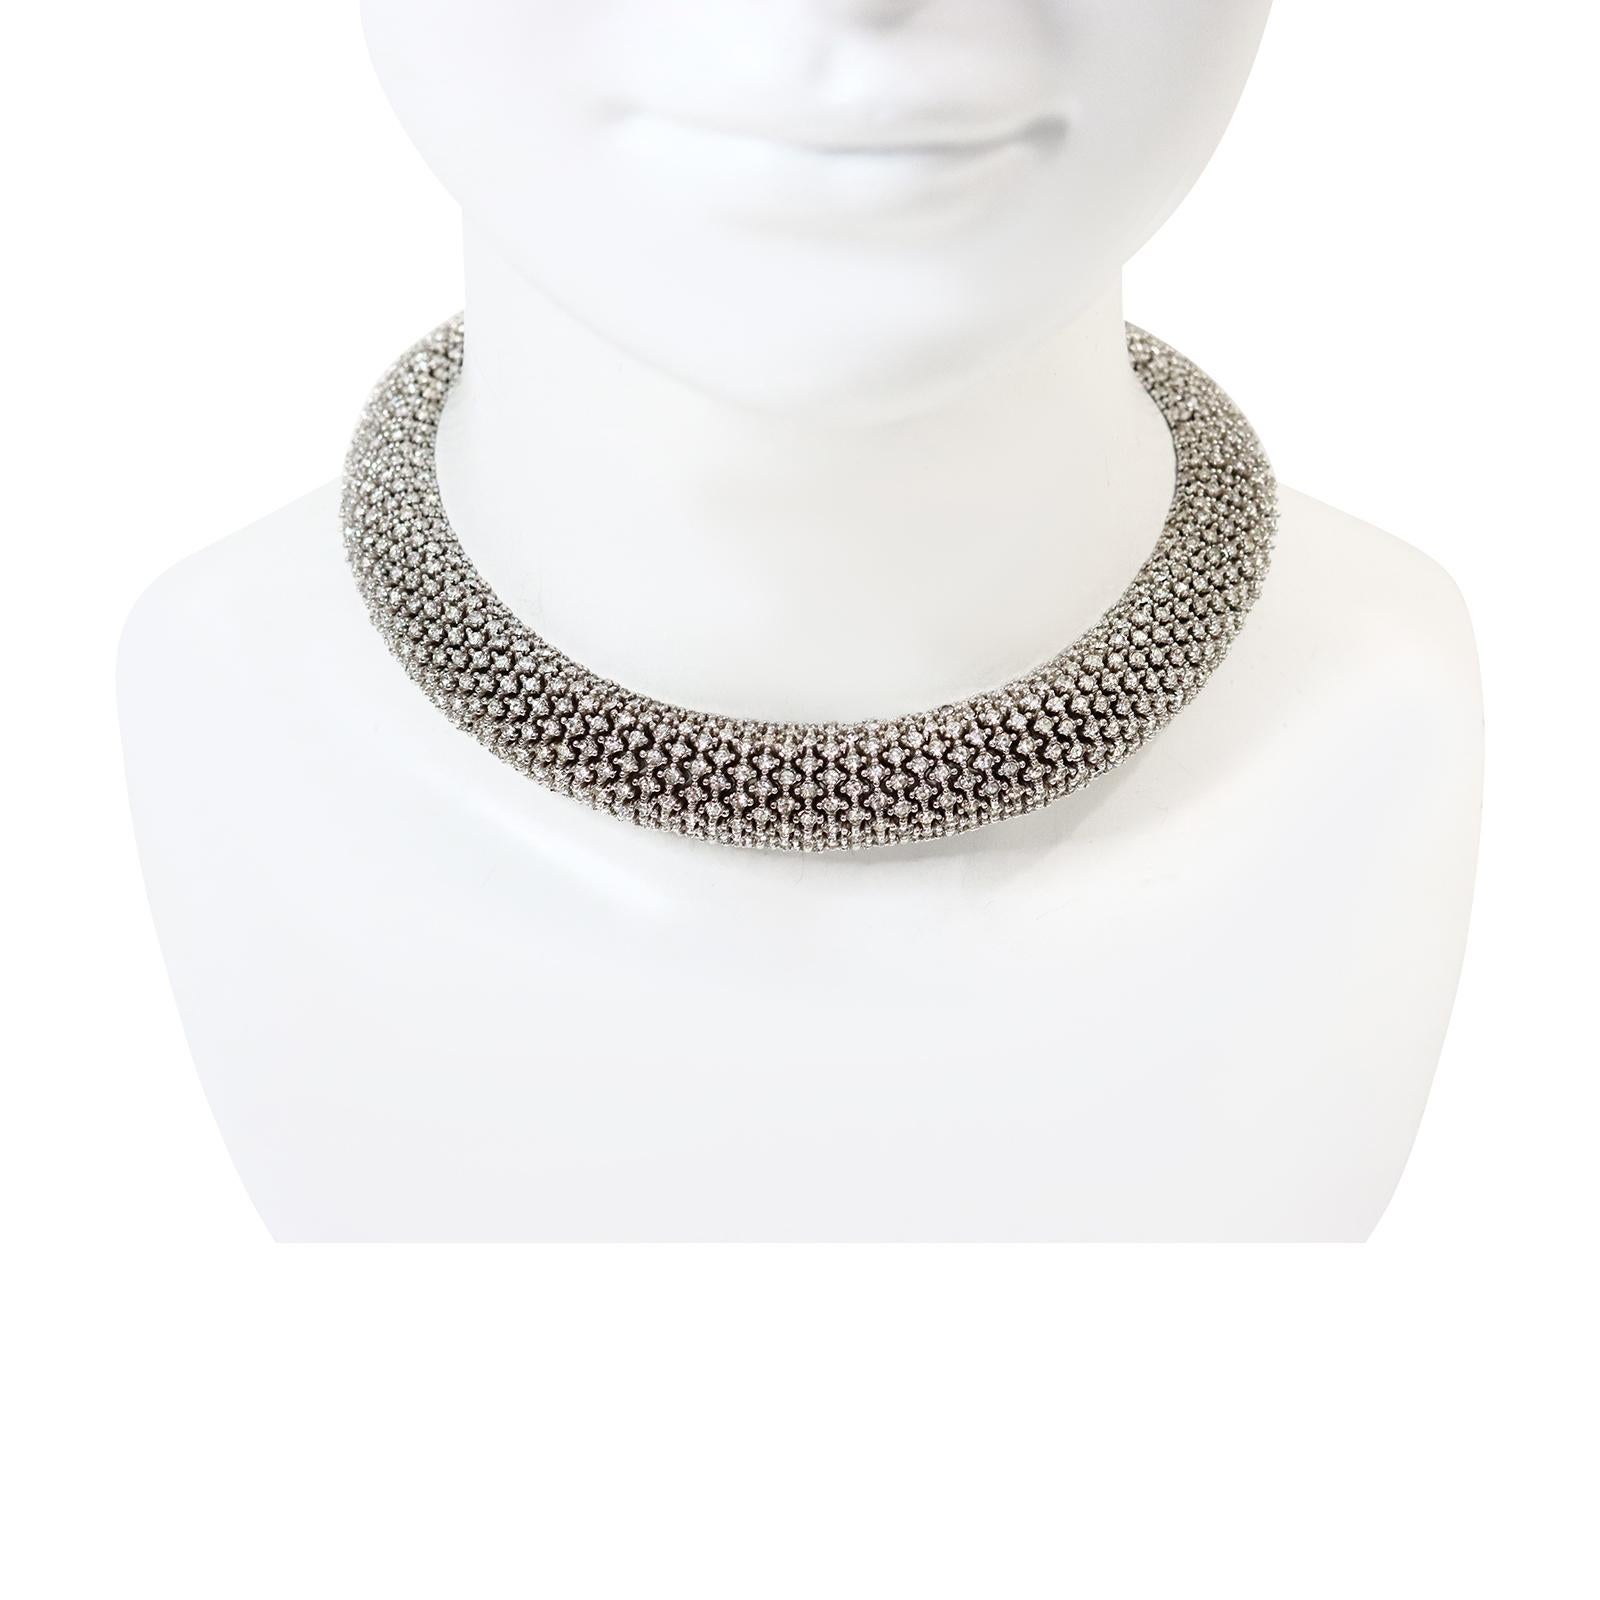 Vintage Ciner Silver Tone Diamante Rounded Choker Necklace Circa 1980s In Good Condition For Sale In New York, NY